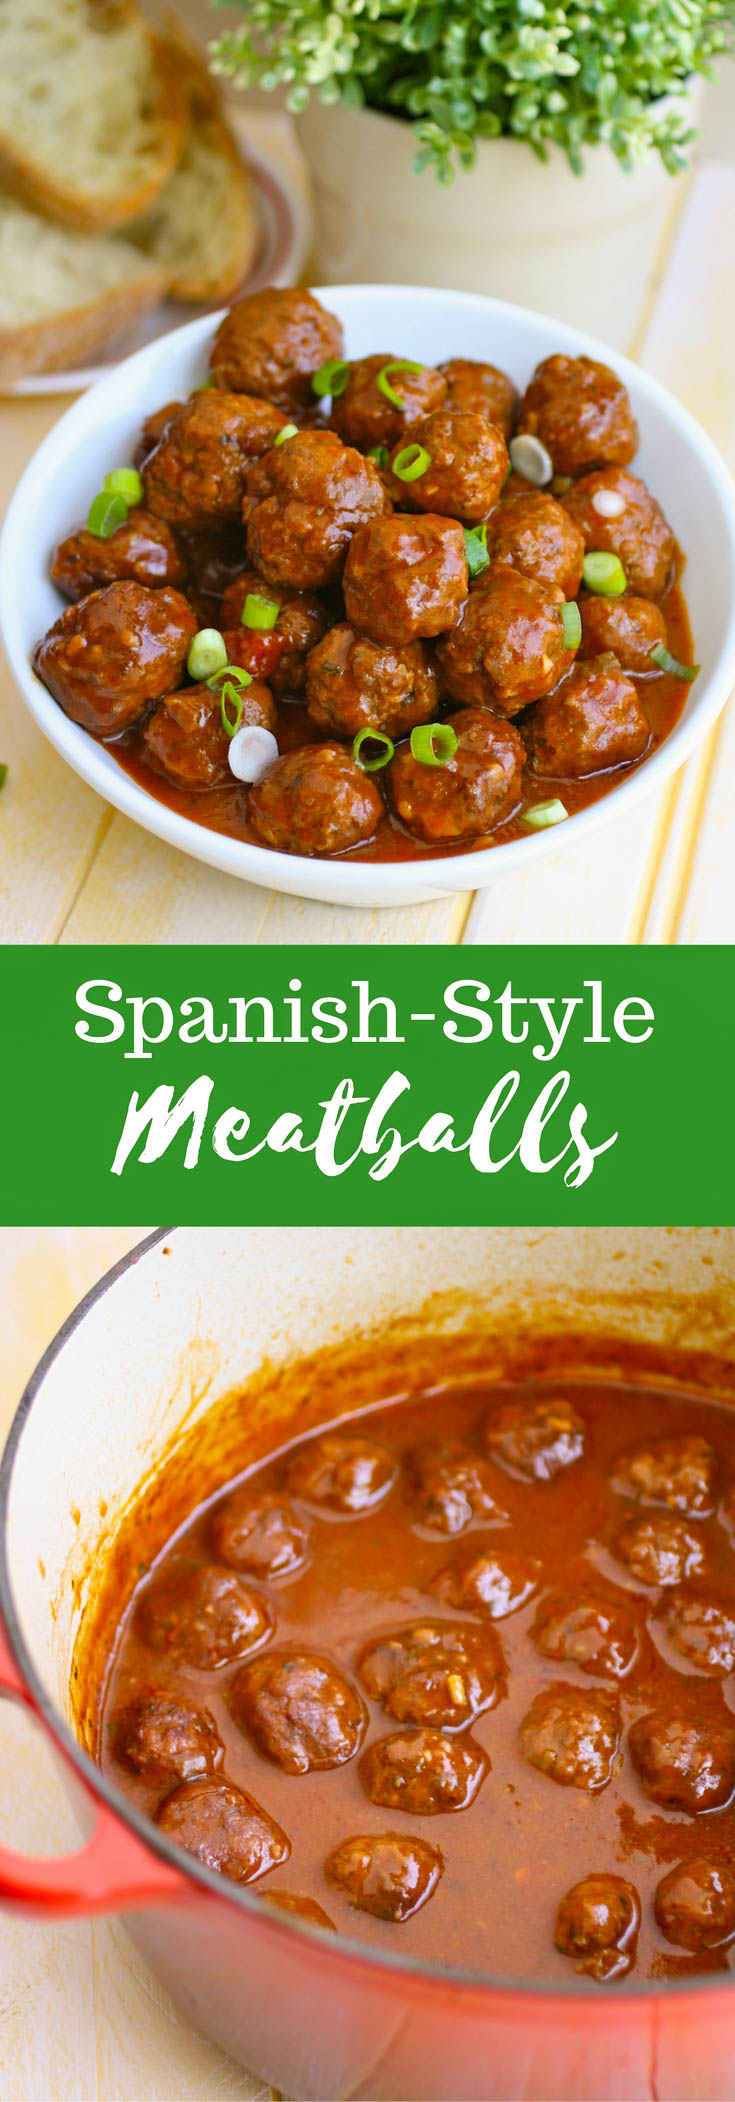 Spanish-Style Meatballs are a delicious appetizer perfect for any party. They're easy to make, and will be the hit at your next gathering!